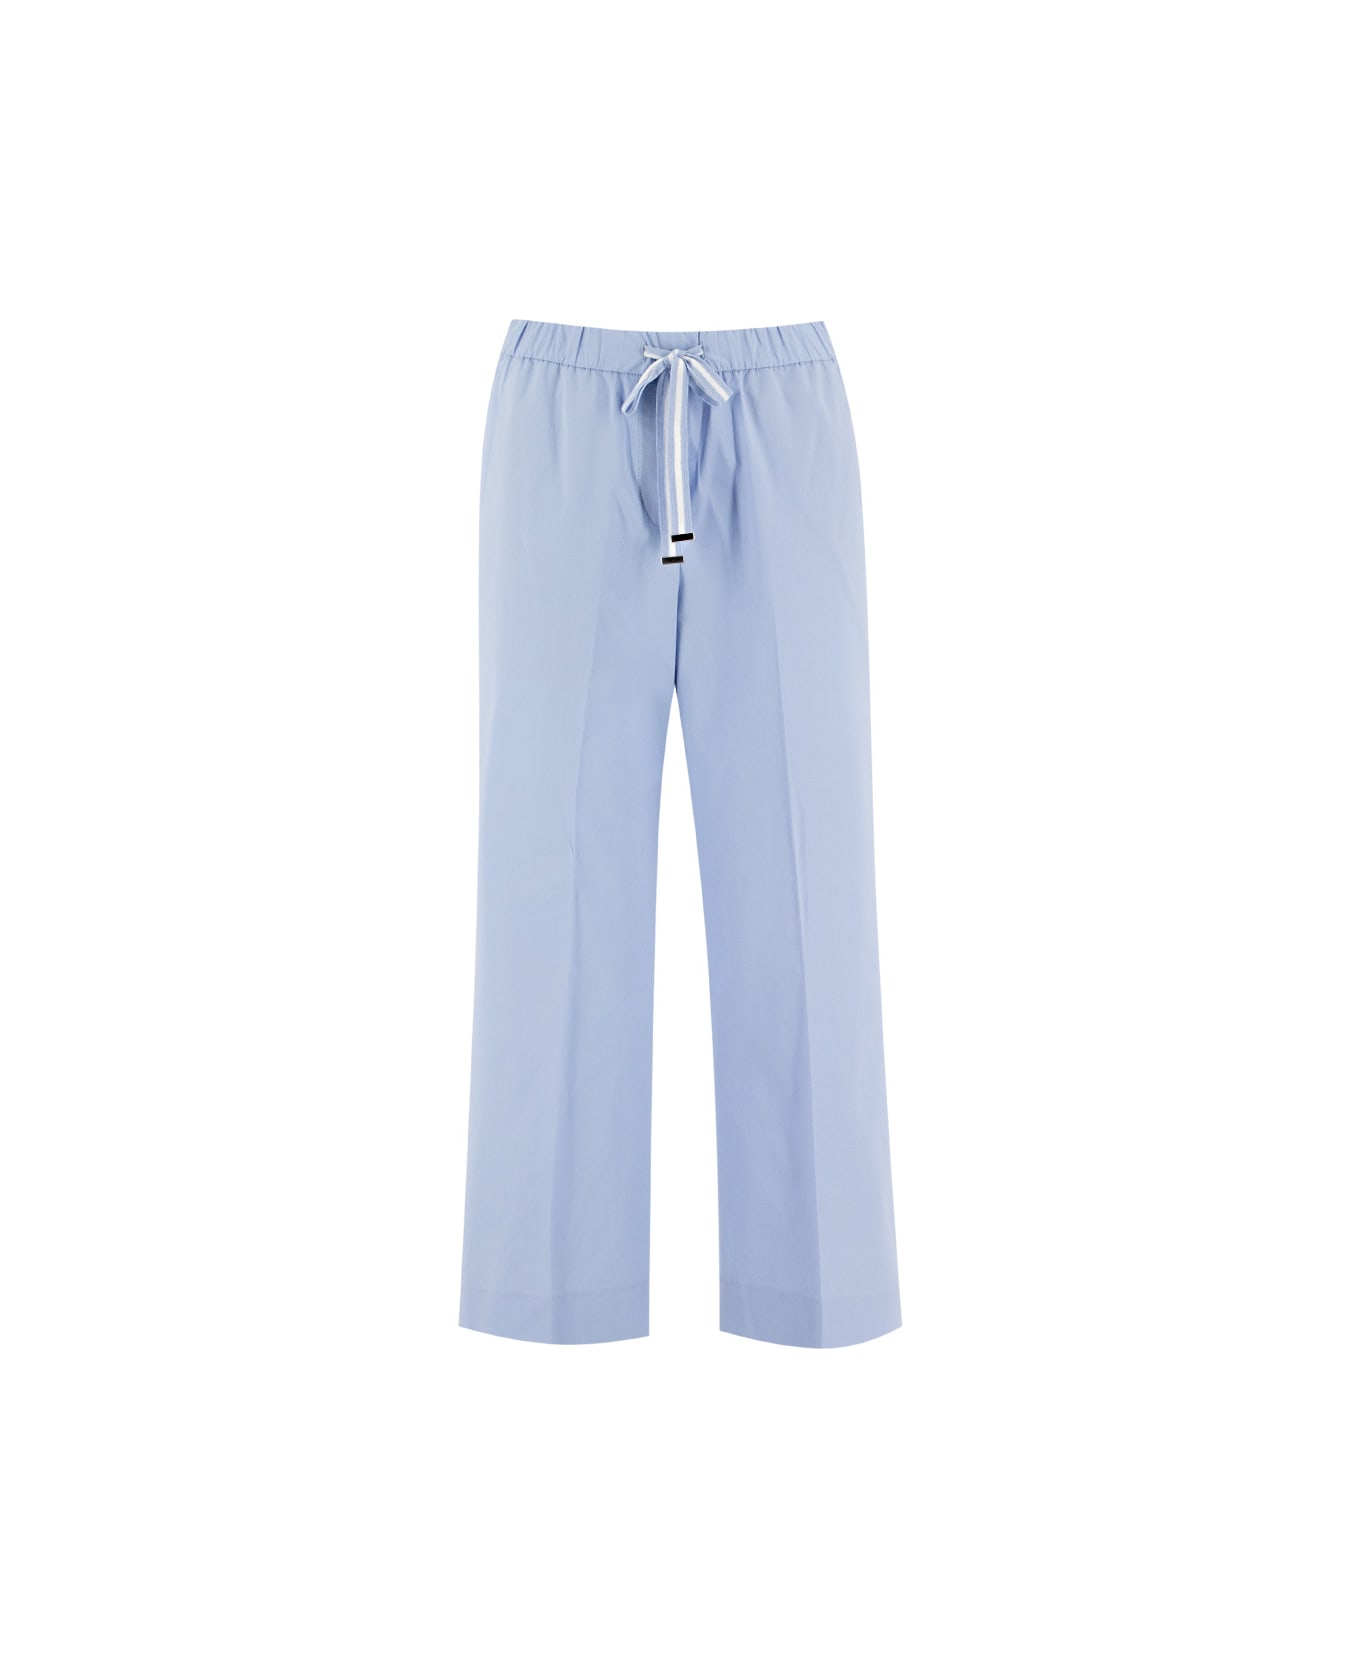 Le Tricot Perugia Trousers - SKY_SKY_WHITE ボトムス